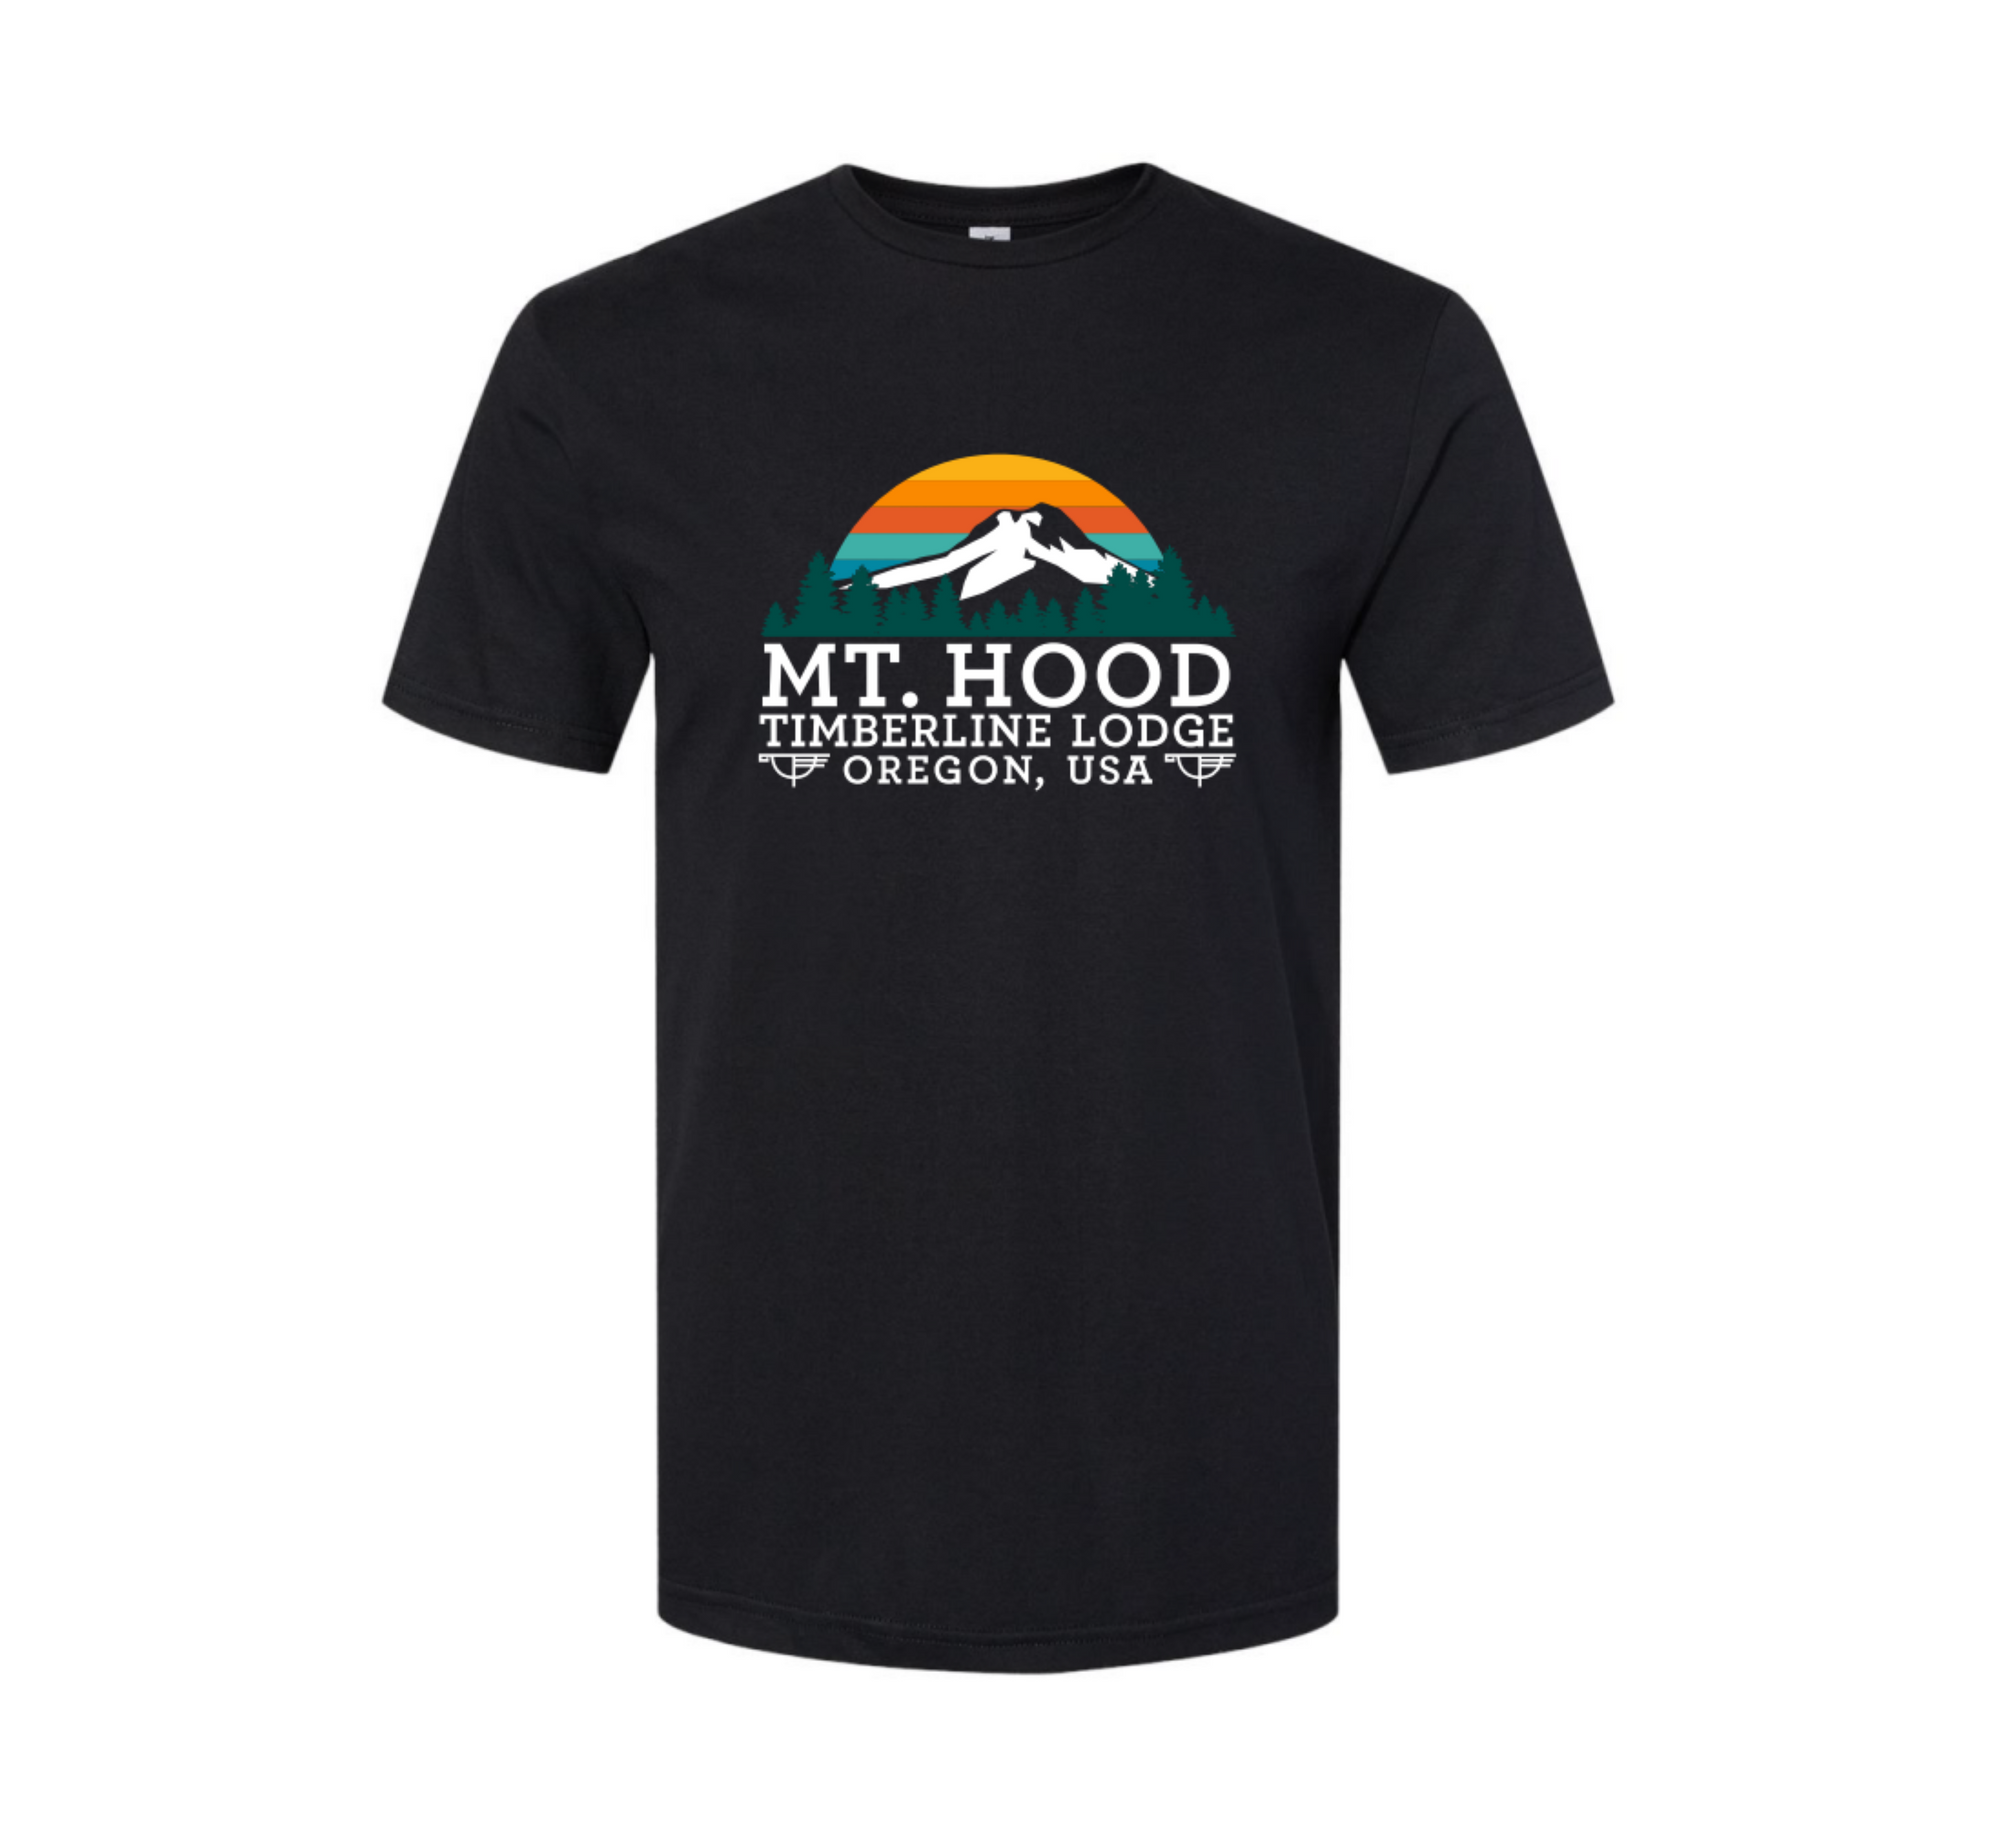 A black Tee shirt with a colorful graphic design featuring "Mt. Hood Timberline Lodge Oregon, USA" at **Daybreak** on the chest.